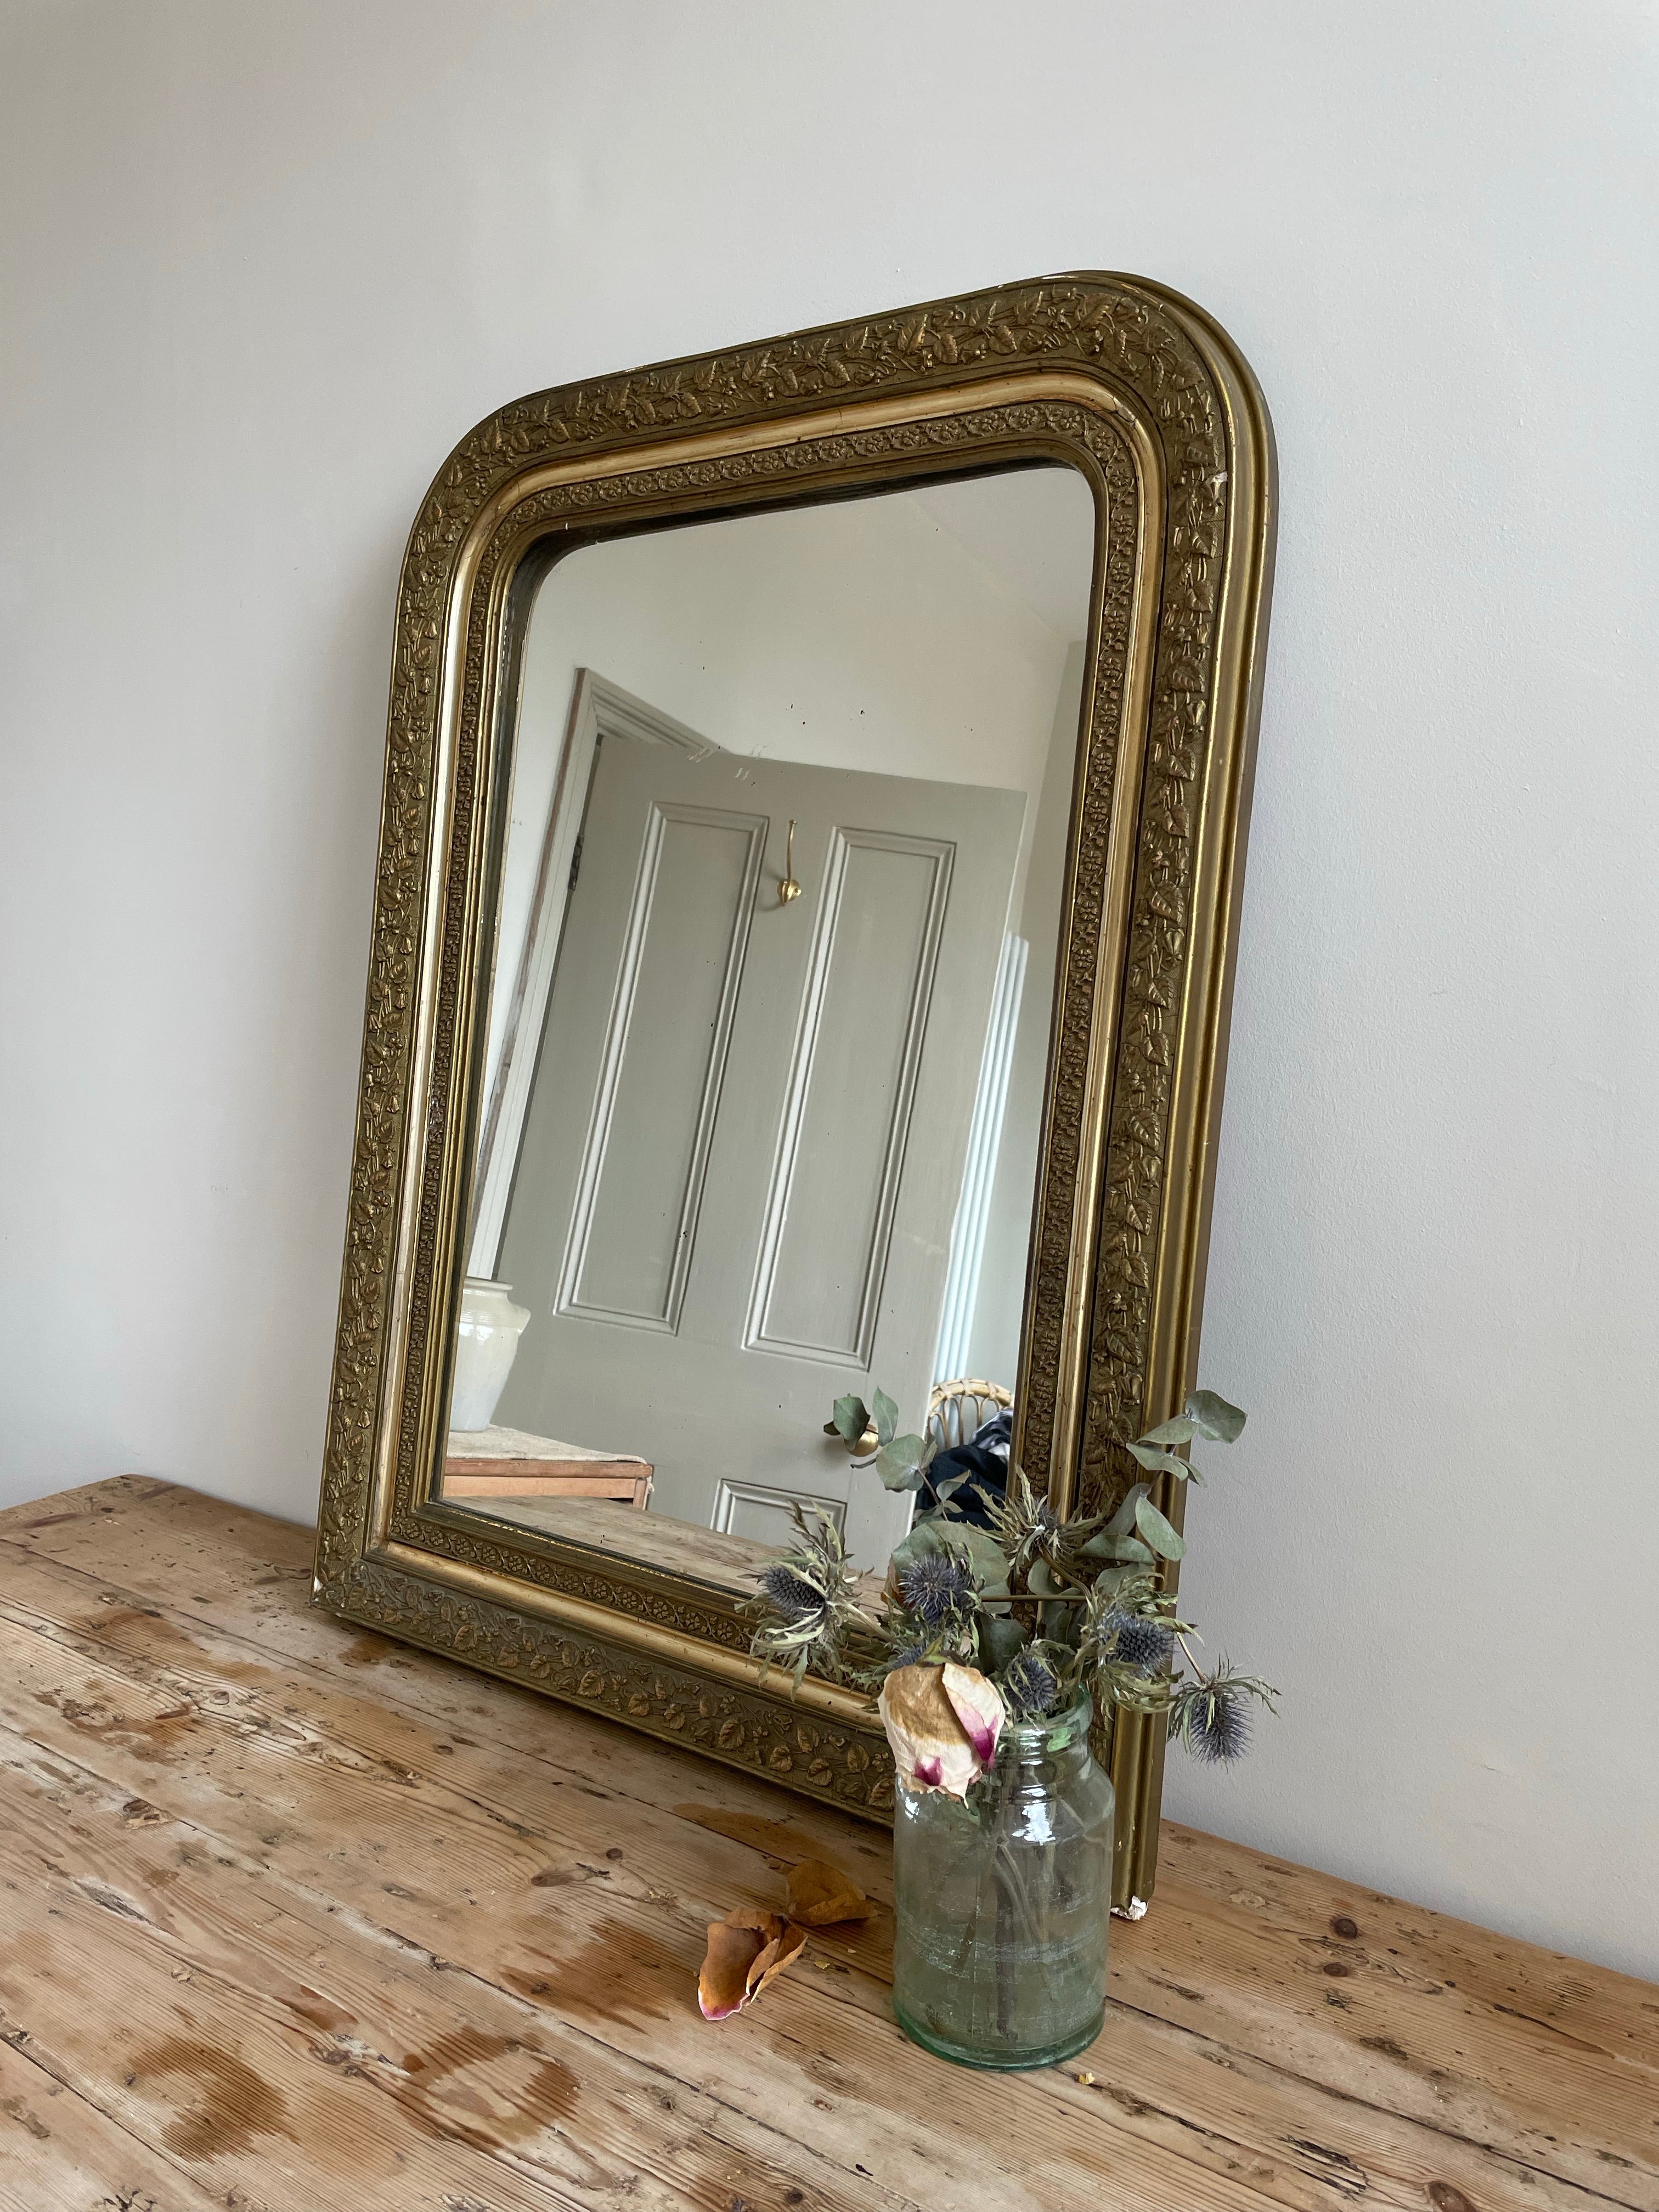 Large Antique French Gilt Mirror